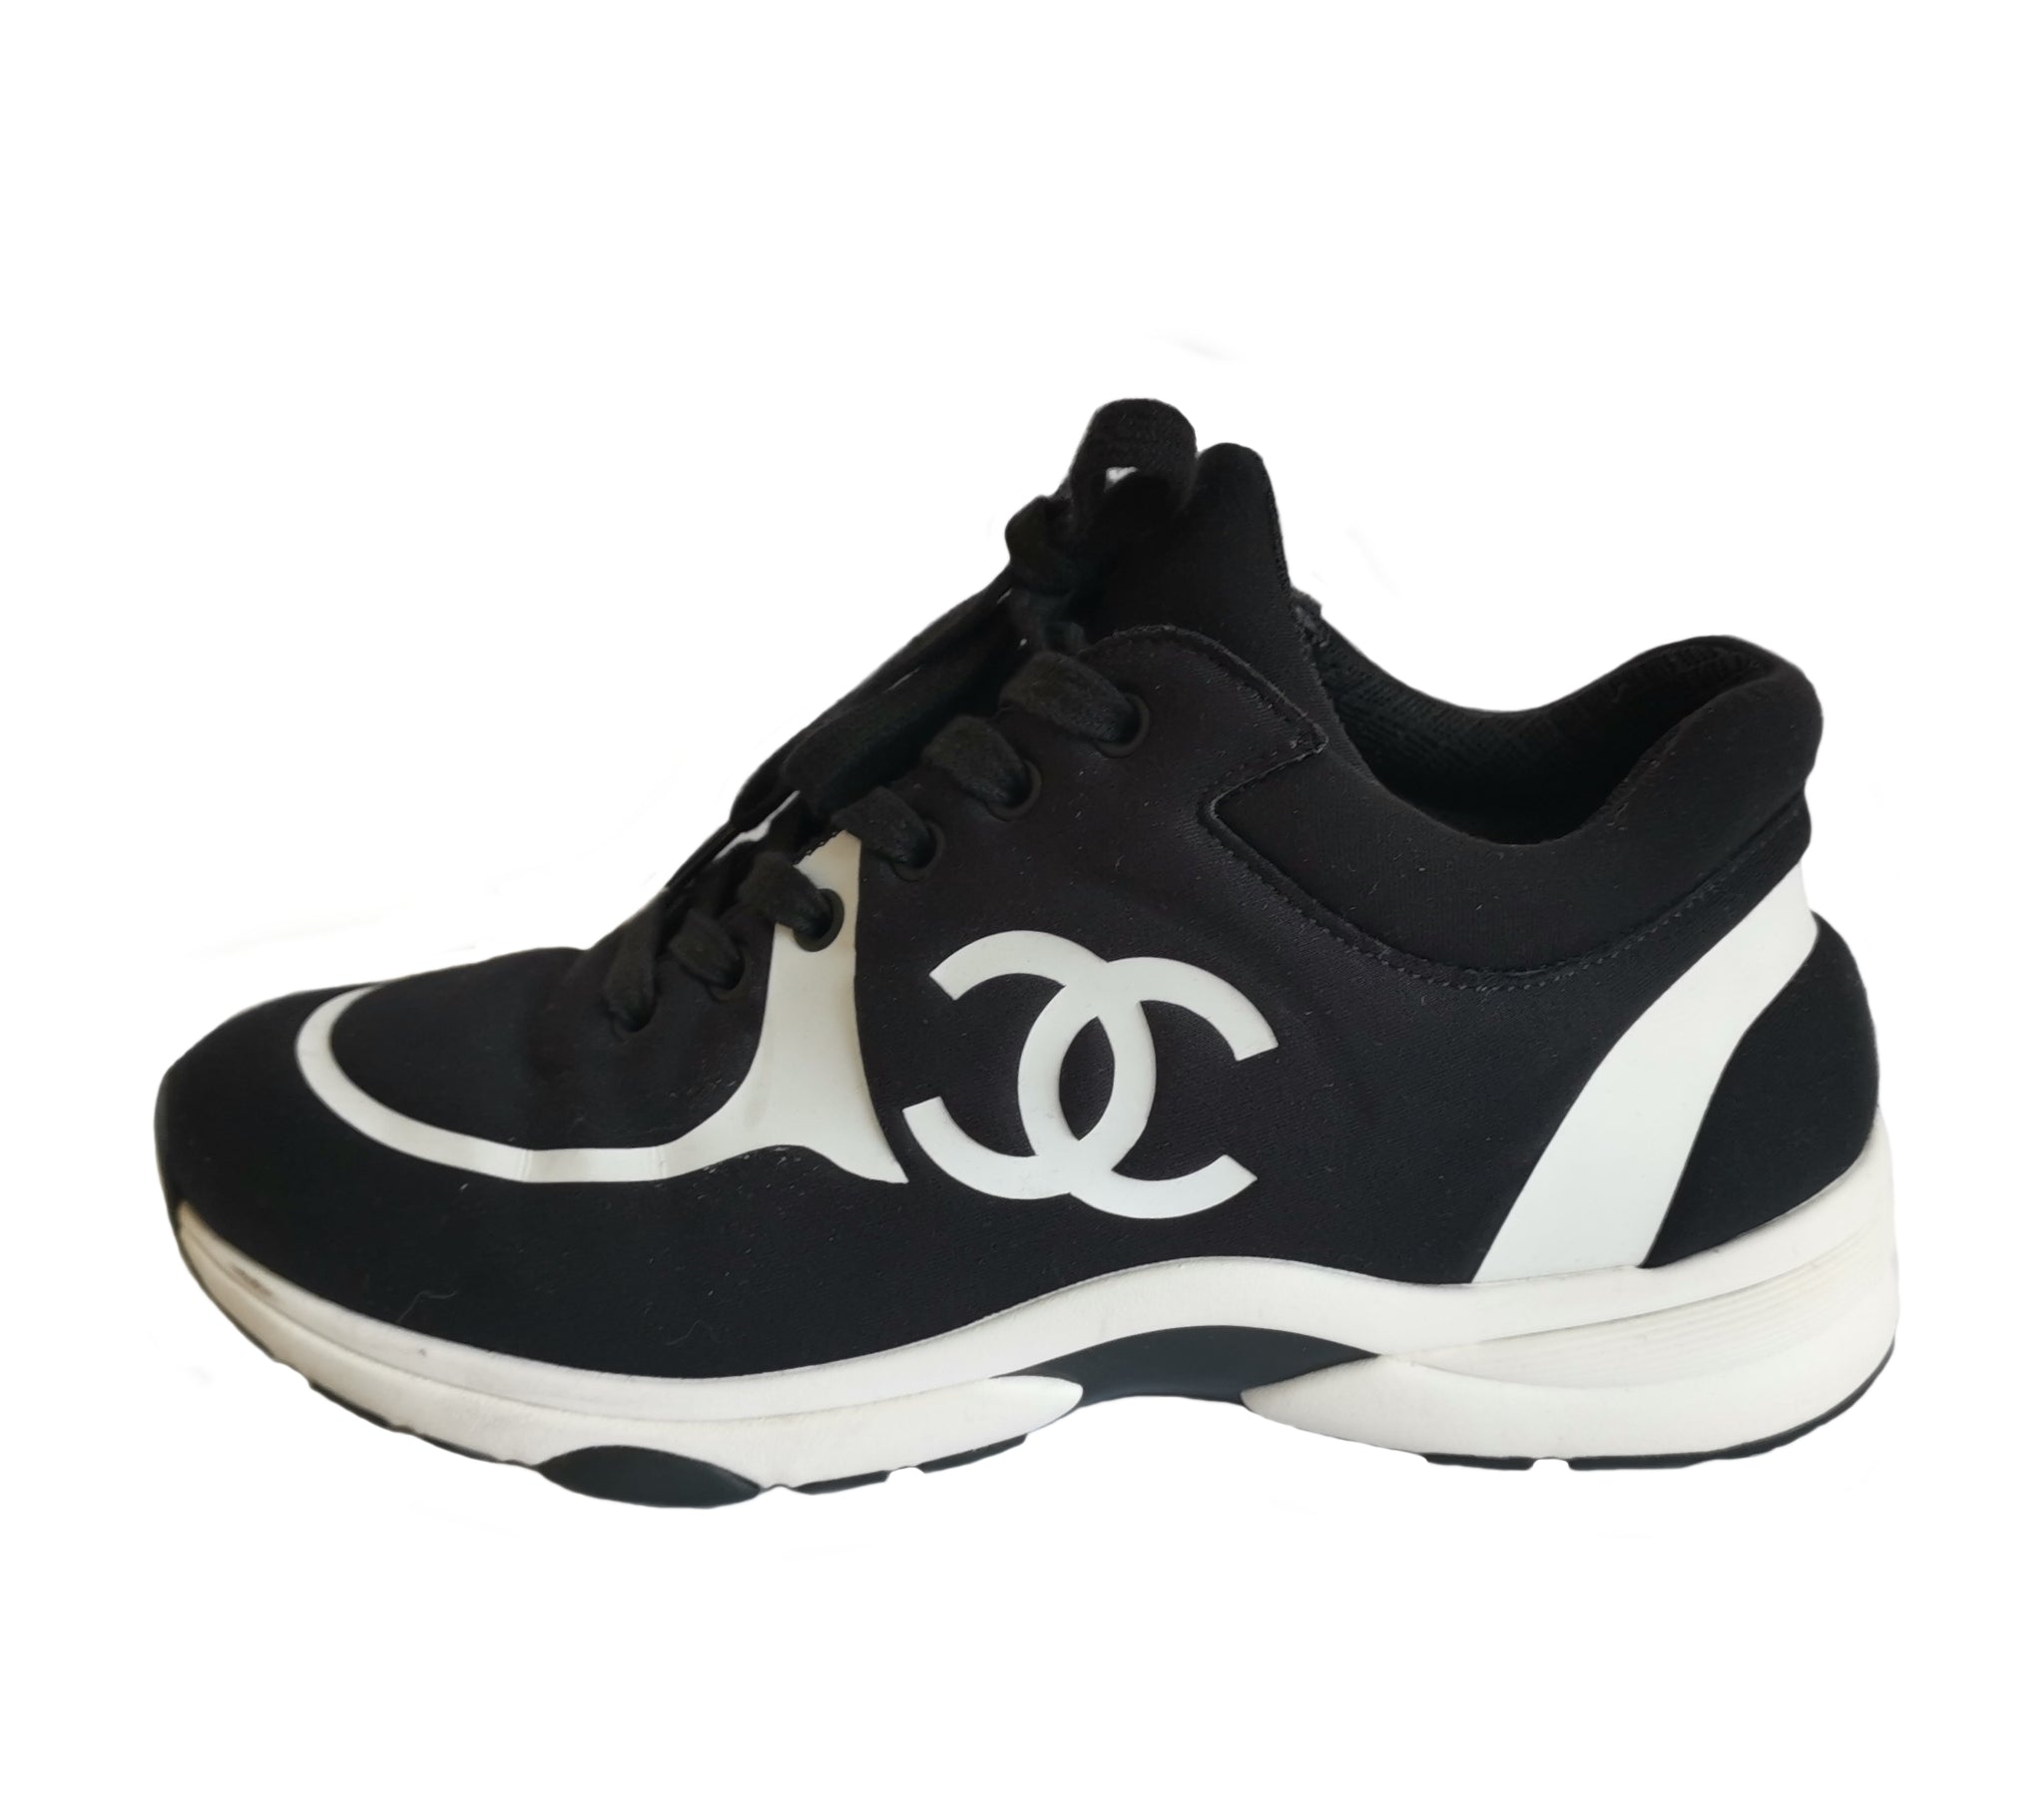 CHANEL BLACK LYCRA CC LOGO 2020 CRUISE COLLECTION SNEAKERS (39